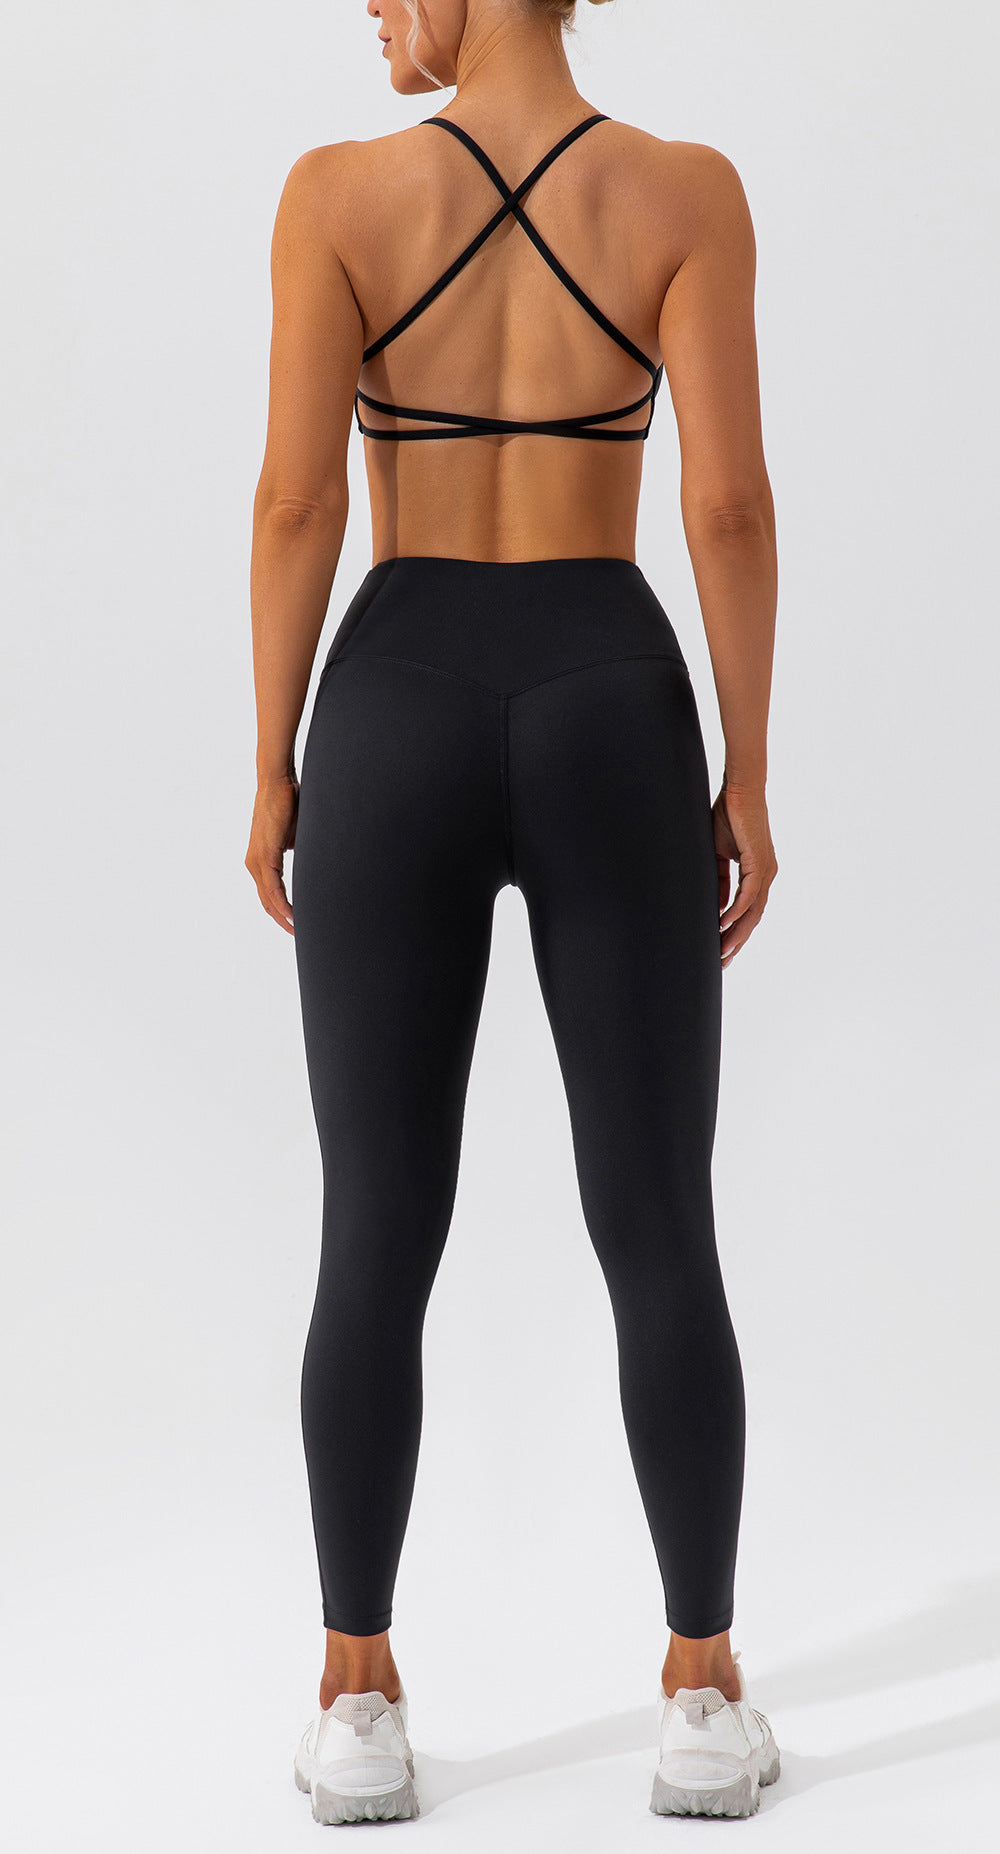 Sports suit sports bra and leggings fitness leisure running quick-drying yoga suit